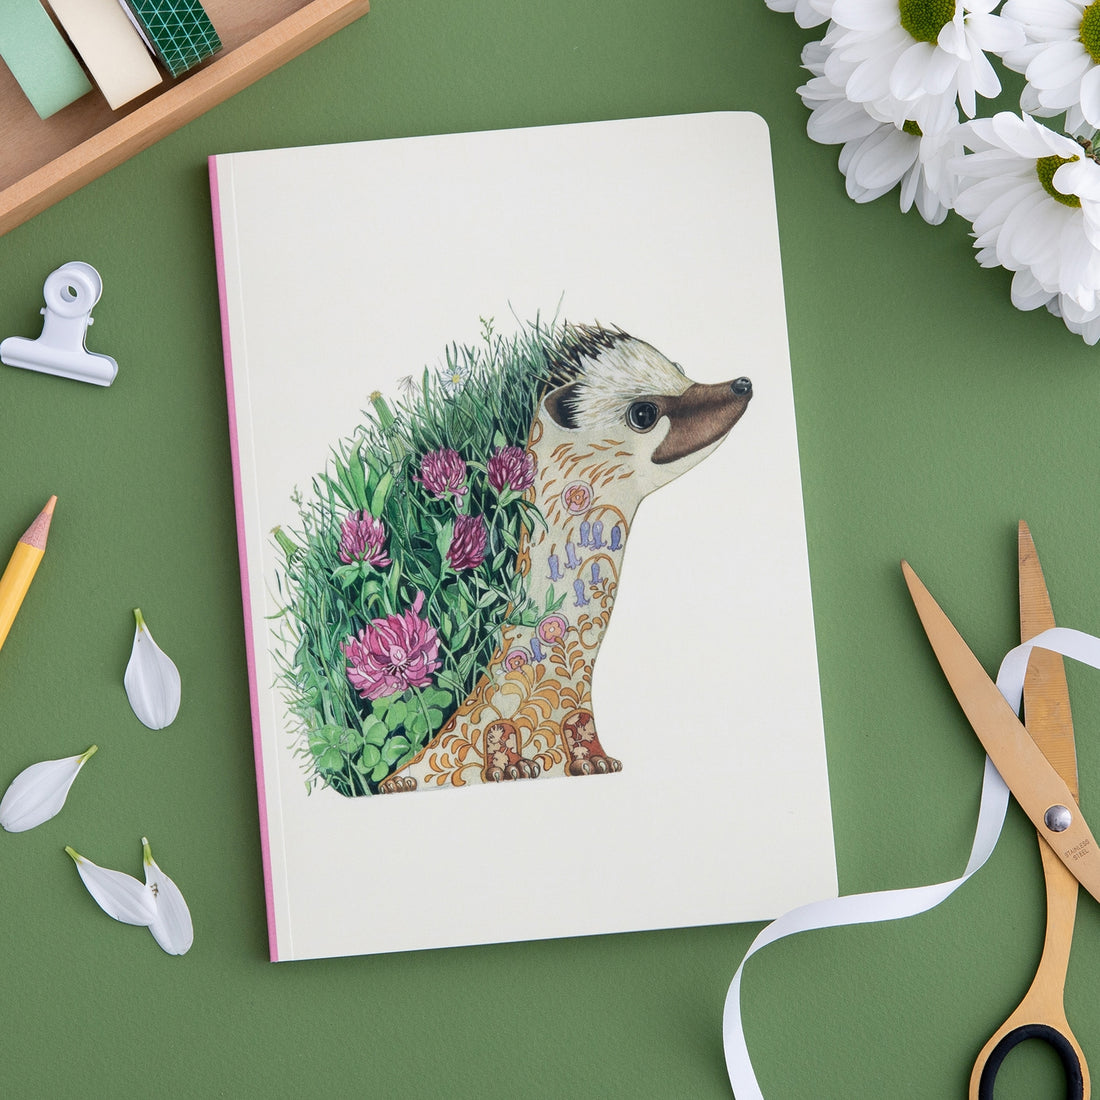 A Hedgehog Perfect Bound Notebook with a hedgehog and flowers on it, crafted by The DM Collection on luxury cream stock.